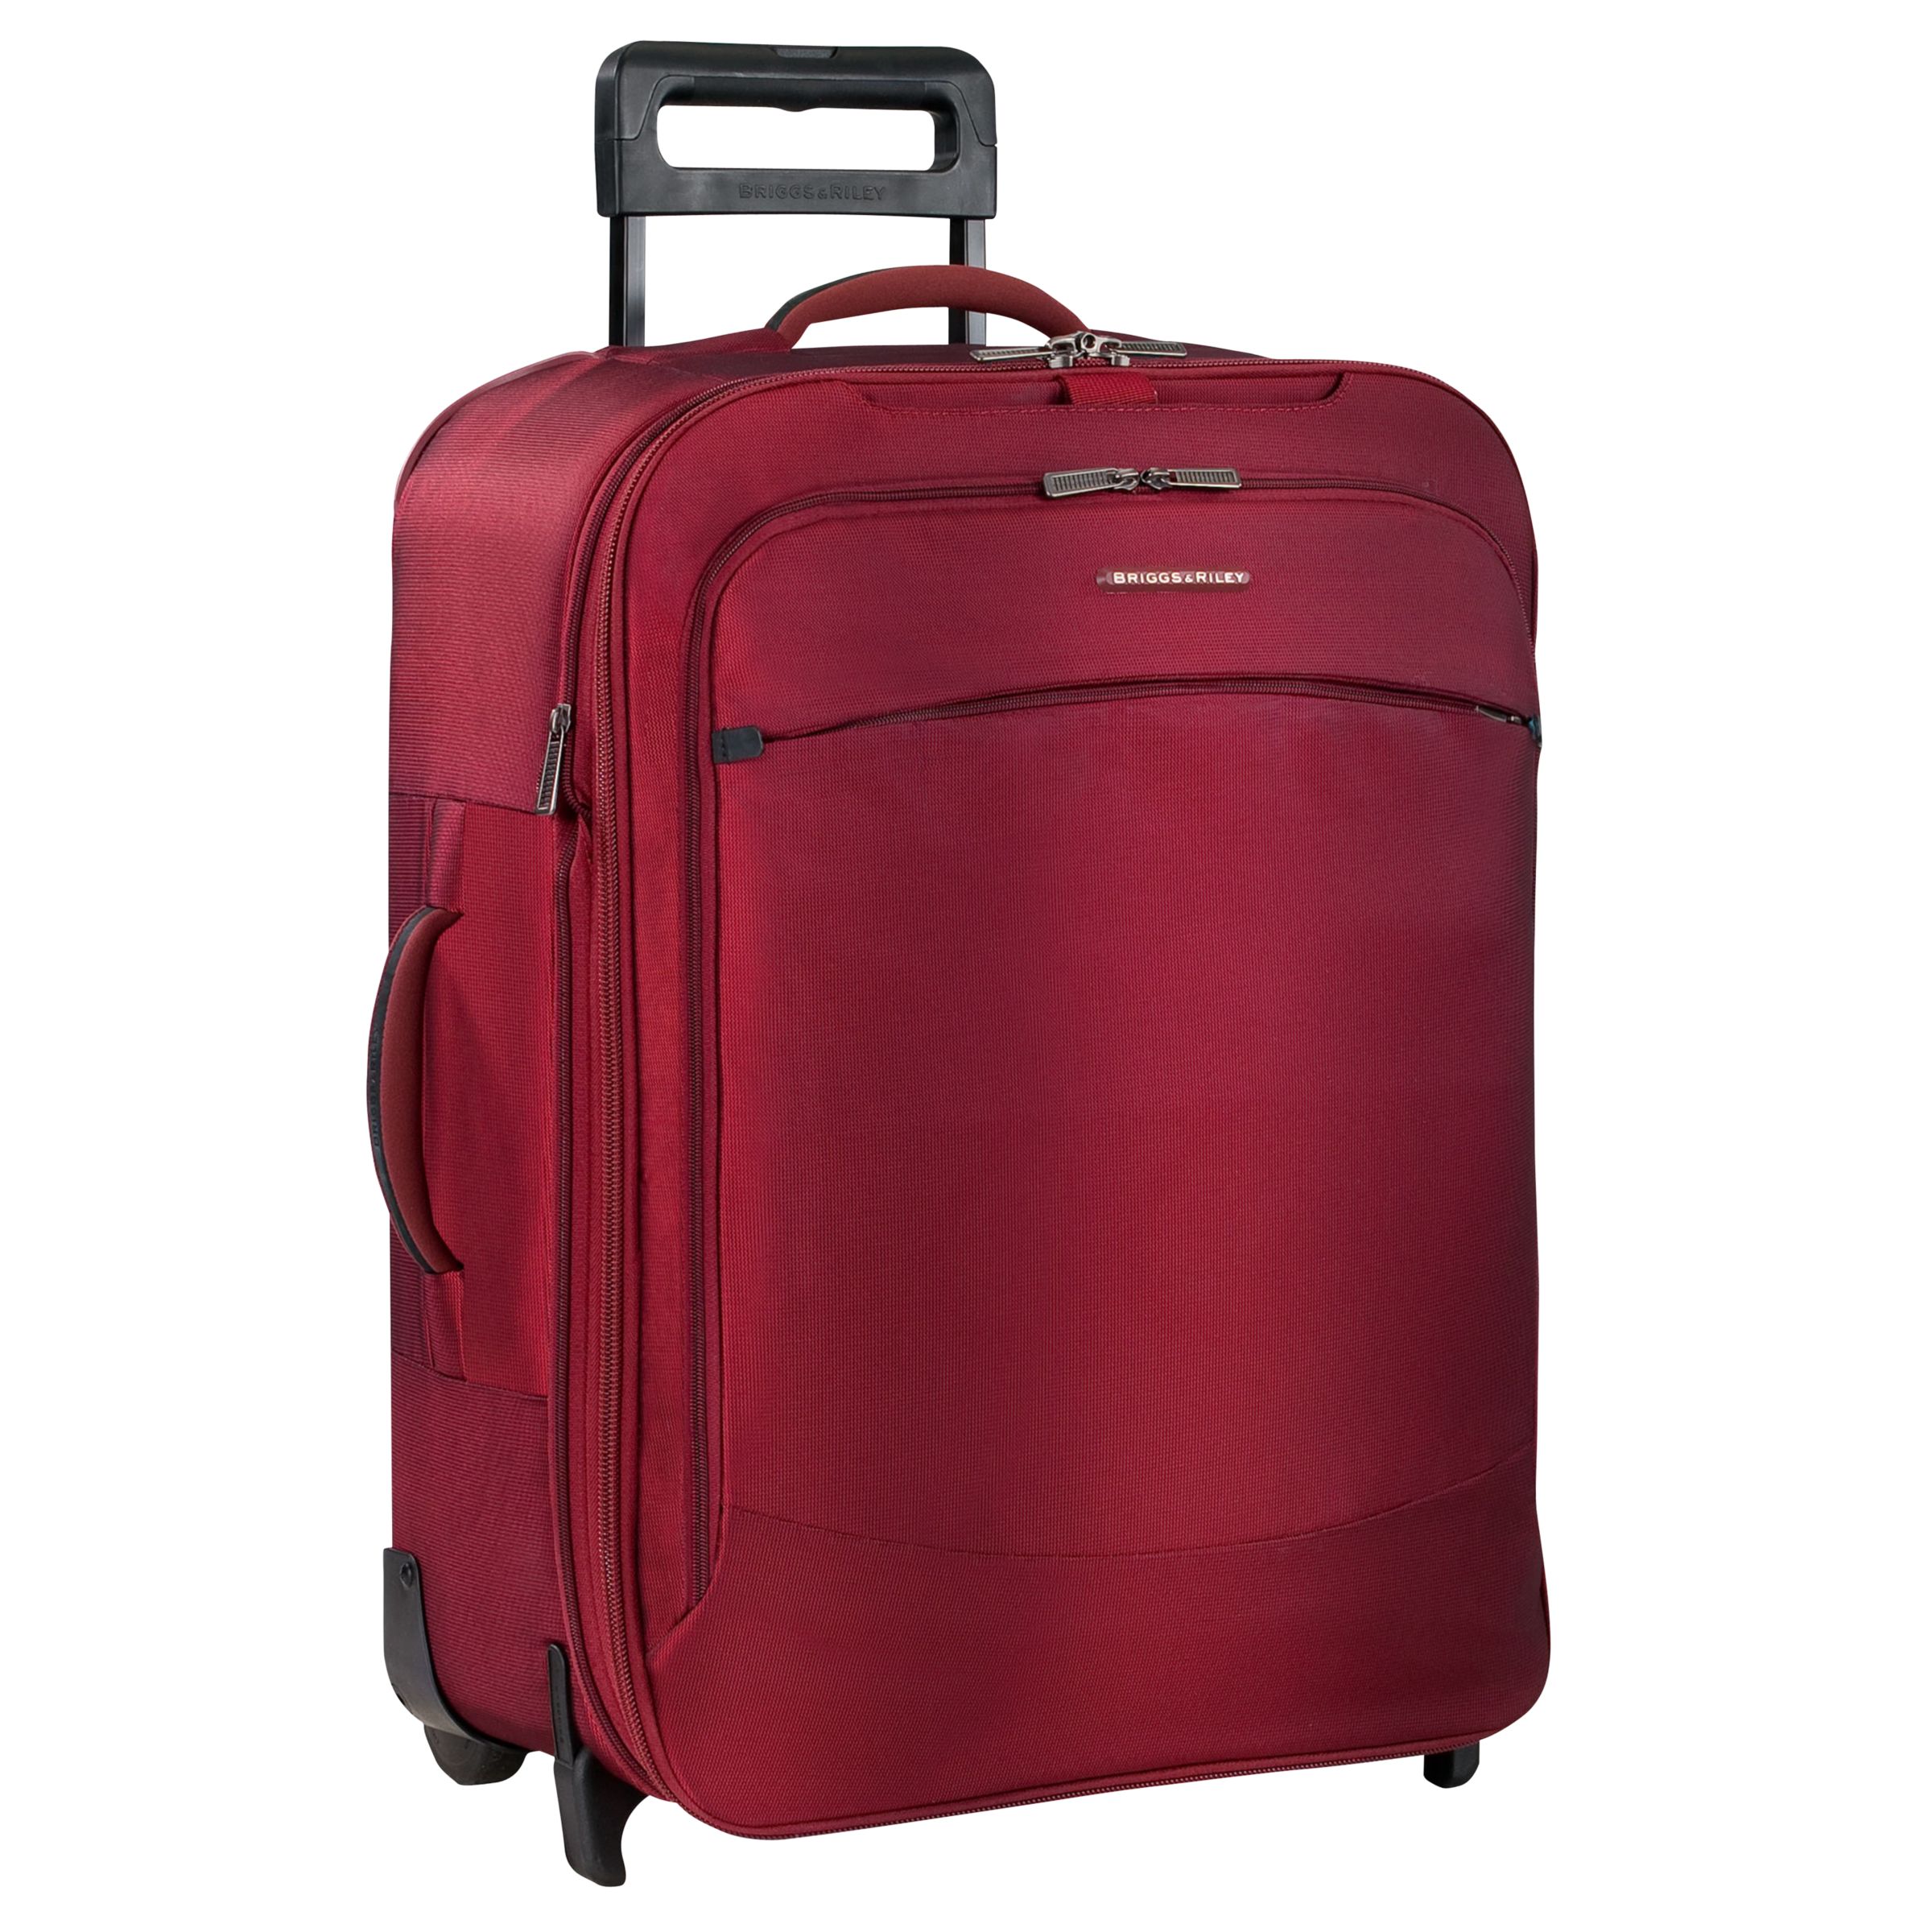 Briggs & Riley 24" Transcend Expandable Trolley Case, Sunset at John Lewis